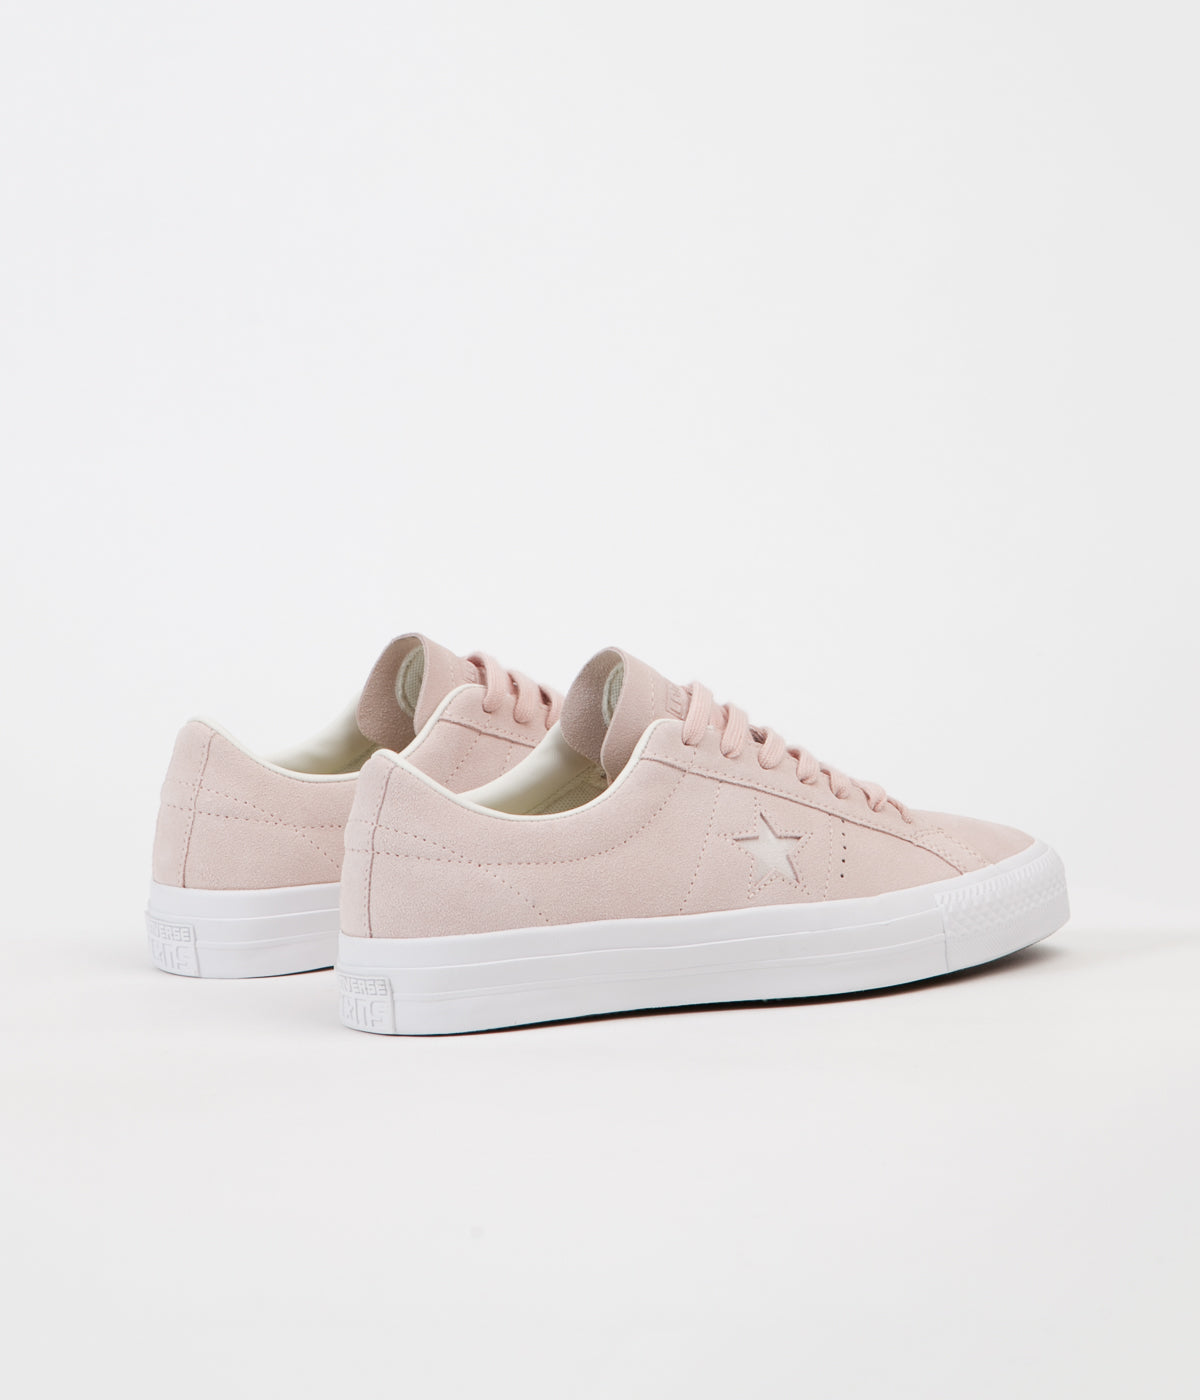 converse one star pink suede